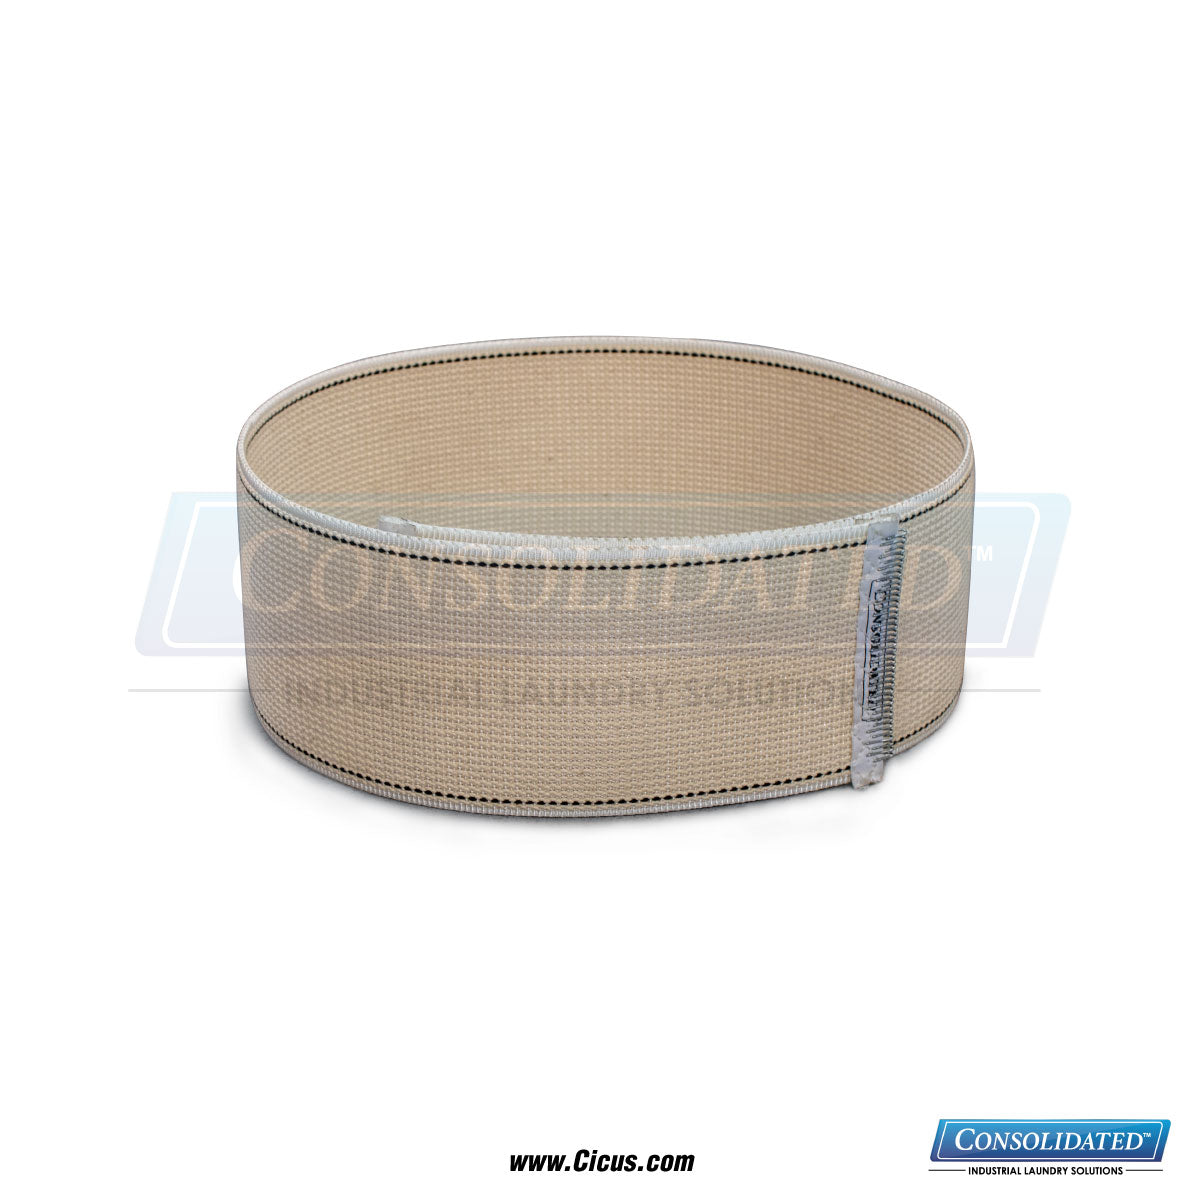 CIC Exclusive Chicago Dryer Canvas Ribbon - 2" x 100" (1001-012)